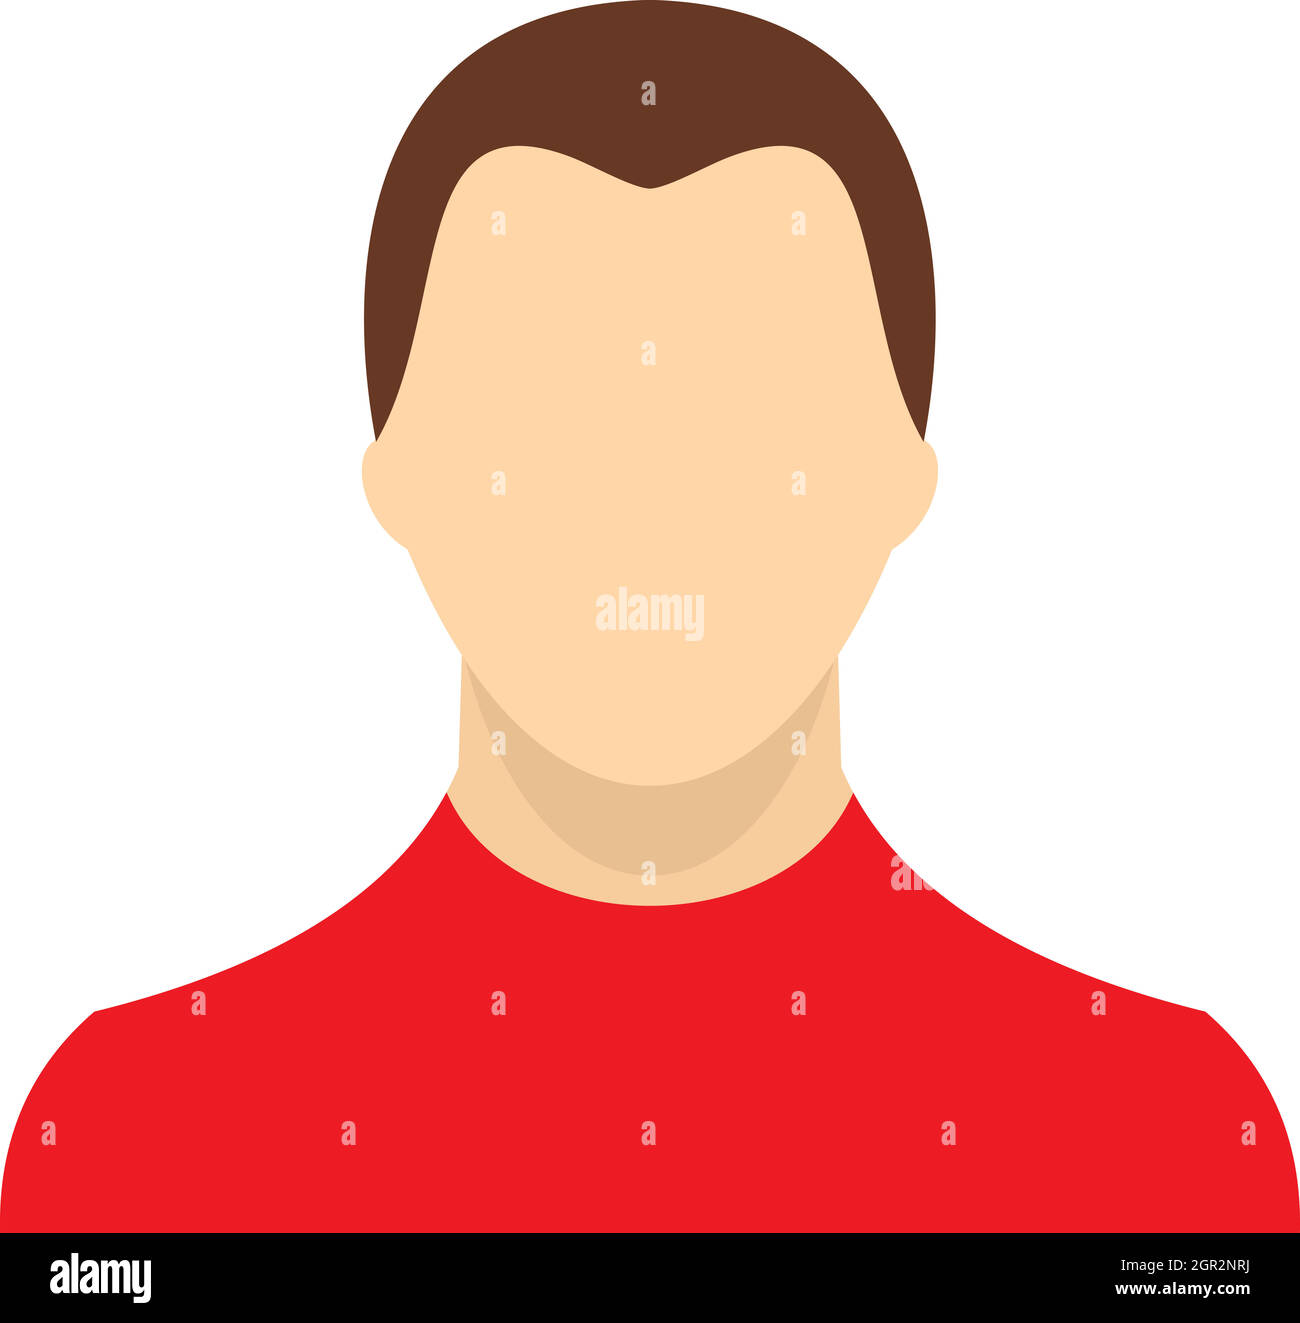 Man in red sweater icon, flat style Stock Vector